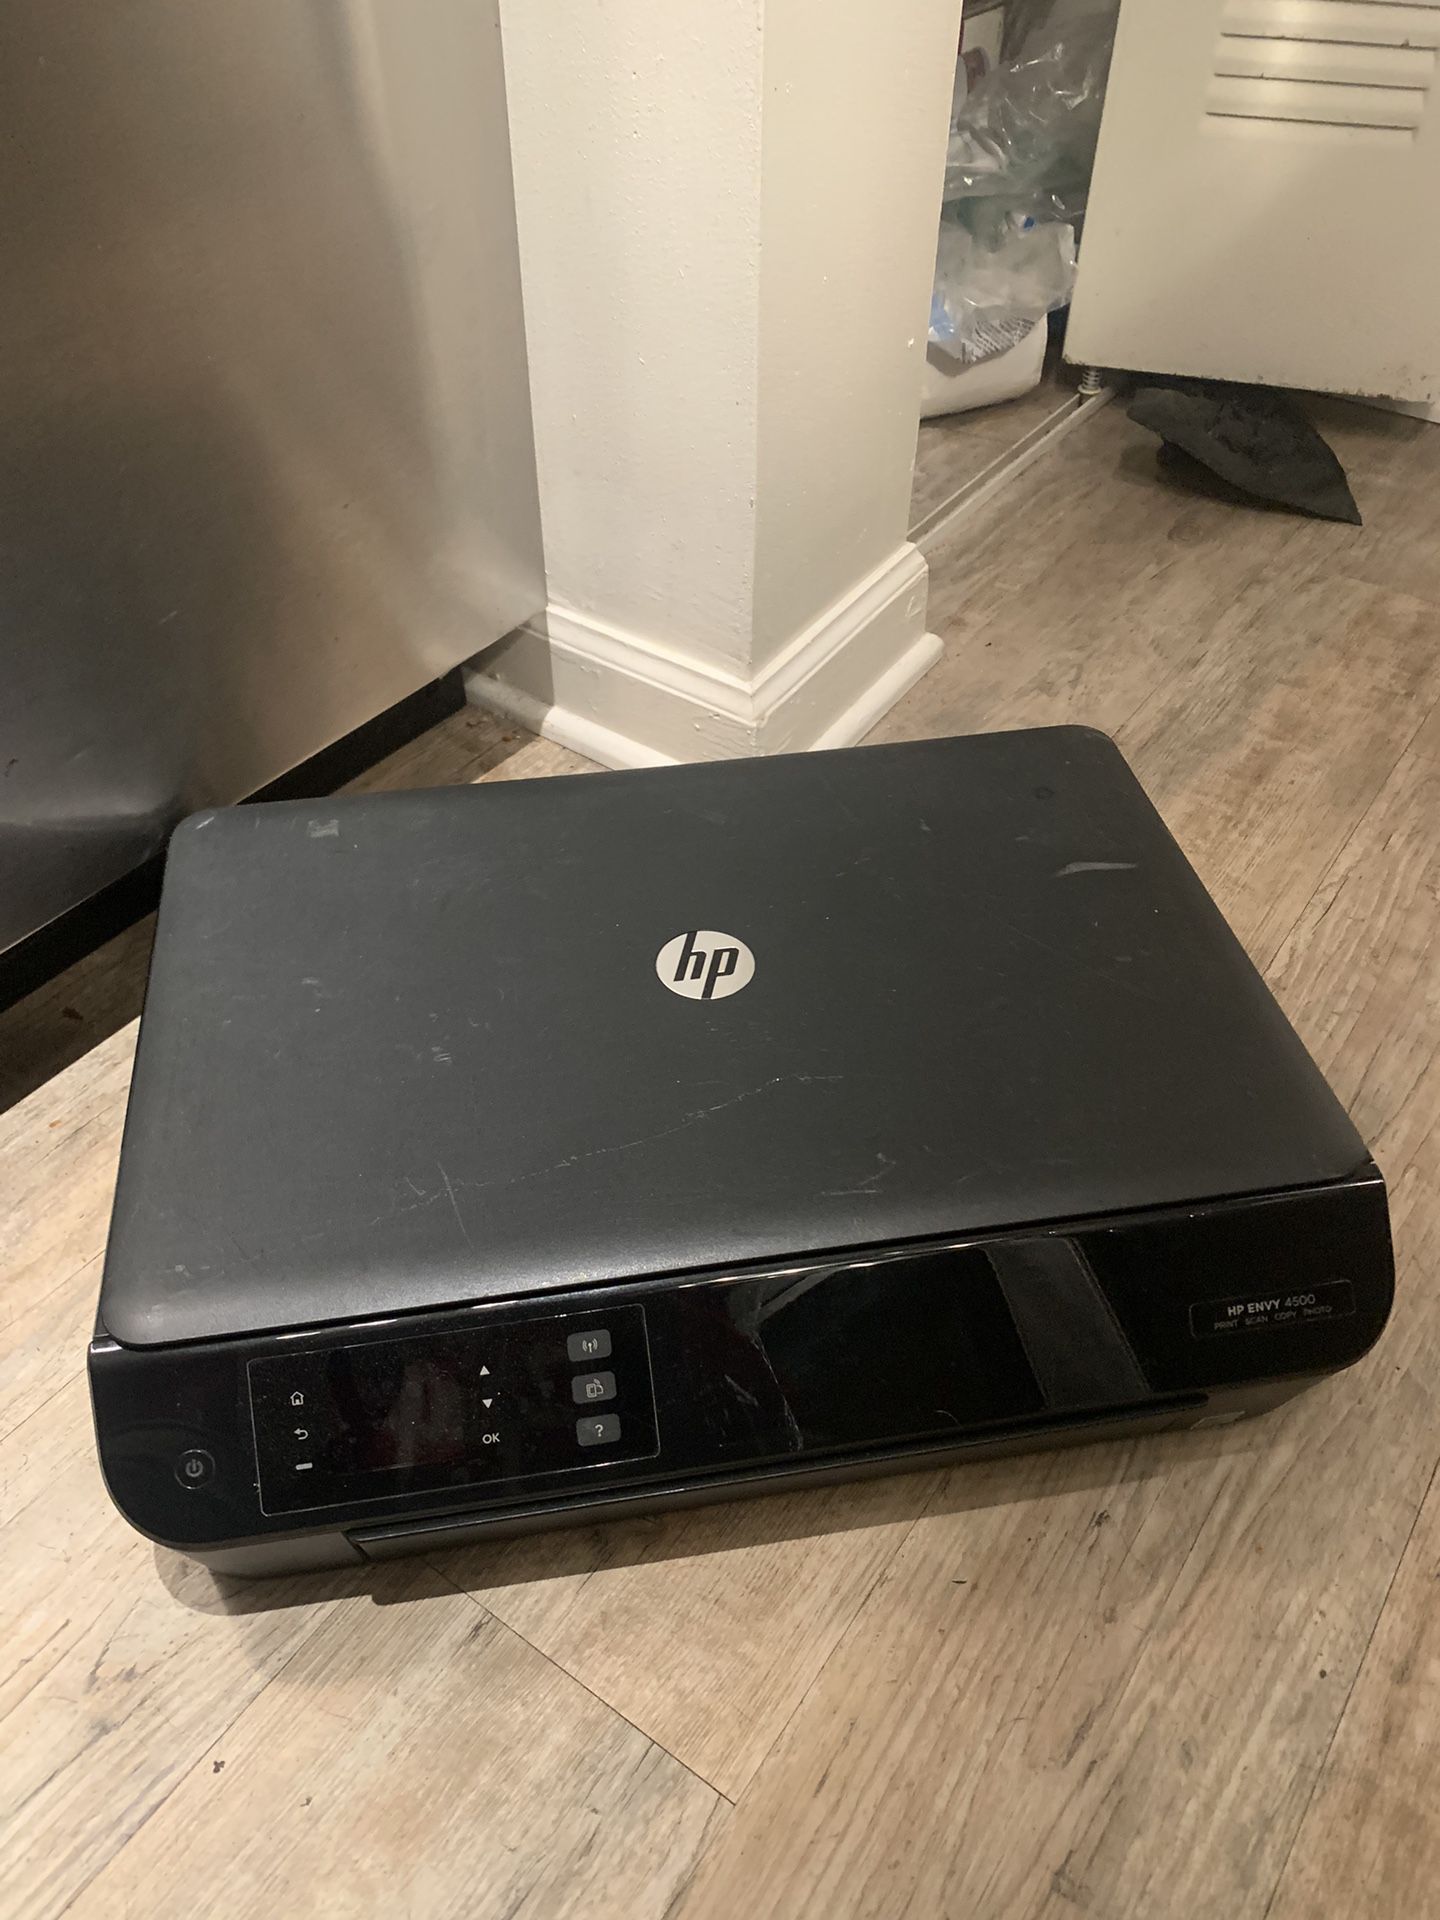 HP Envy ALL-IN-ONE Inkjet Printer Copy WiFi Needs Ink Tested Working for in Fort Pierce, FL - OfferUp